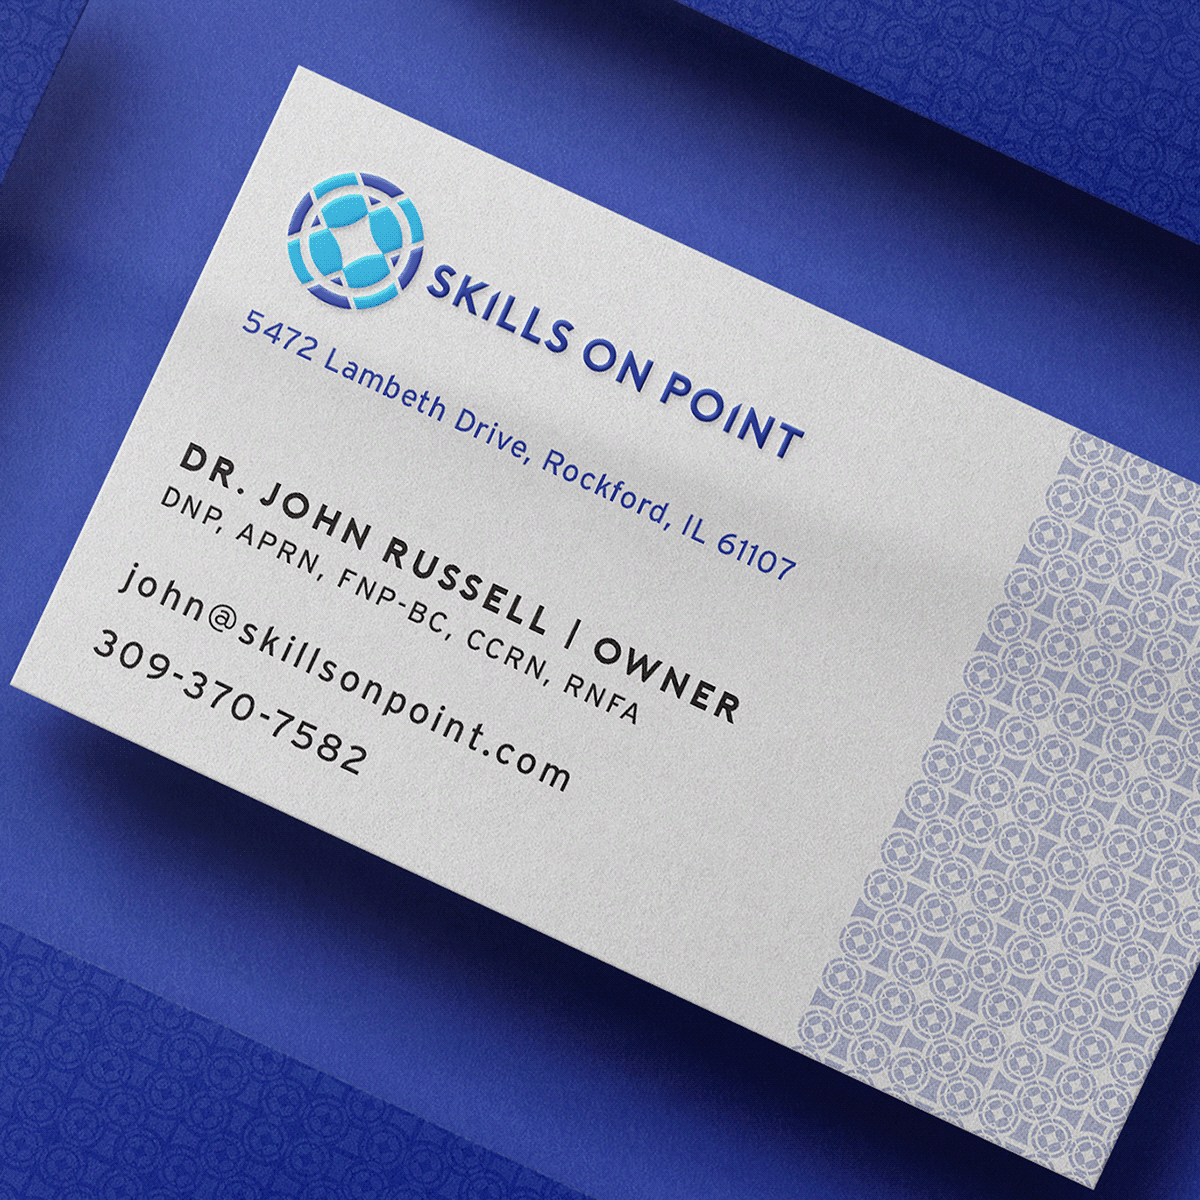 business card example - skills on point rockford